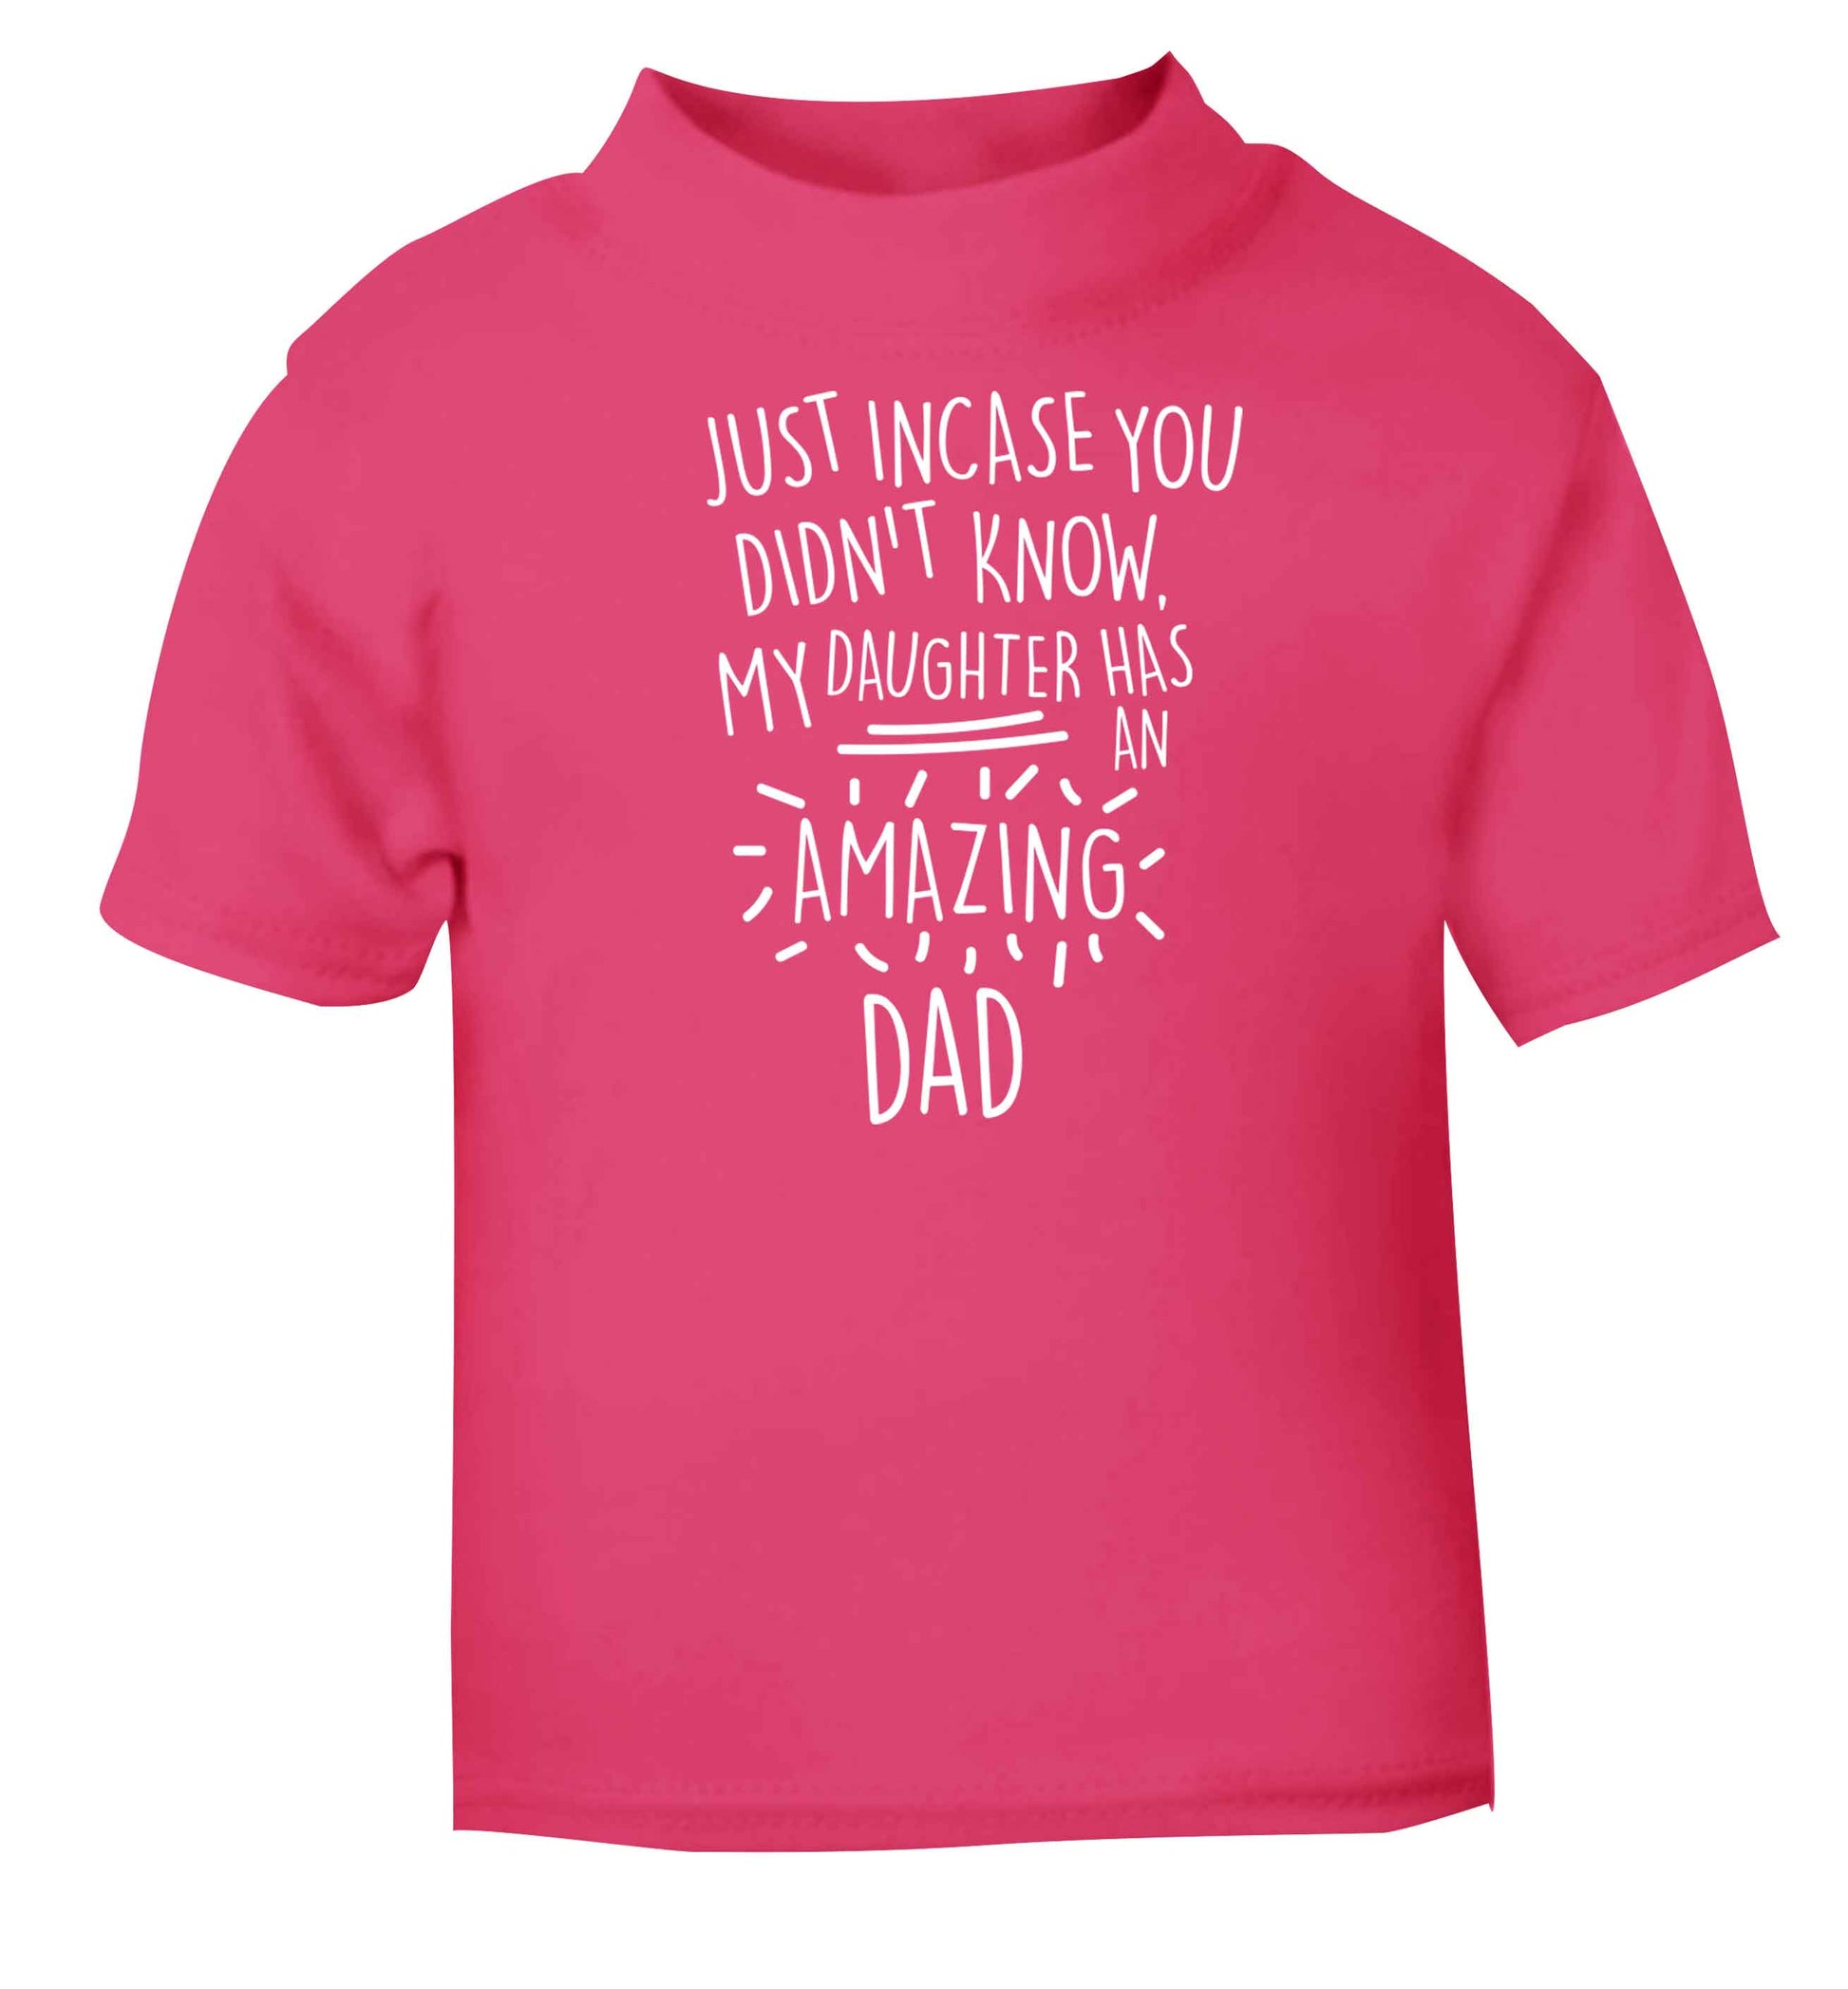 Just incase you didn't know my daughter has an amazing dad pink baby toddler Tshirt 2 Years